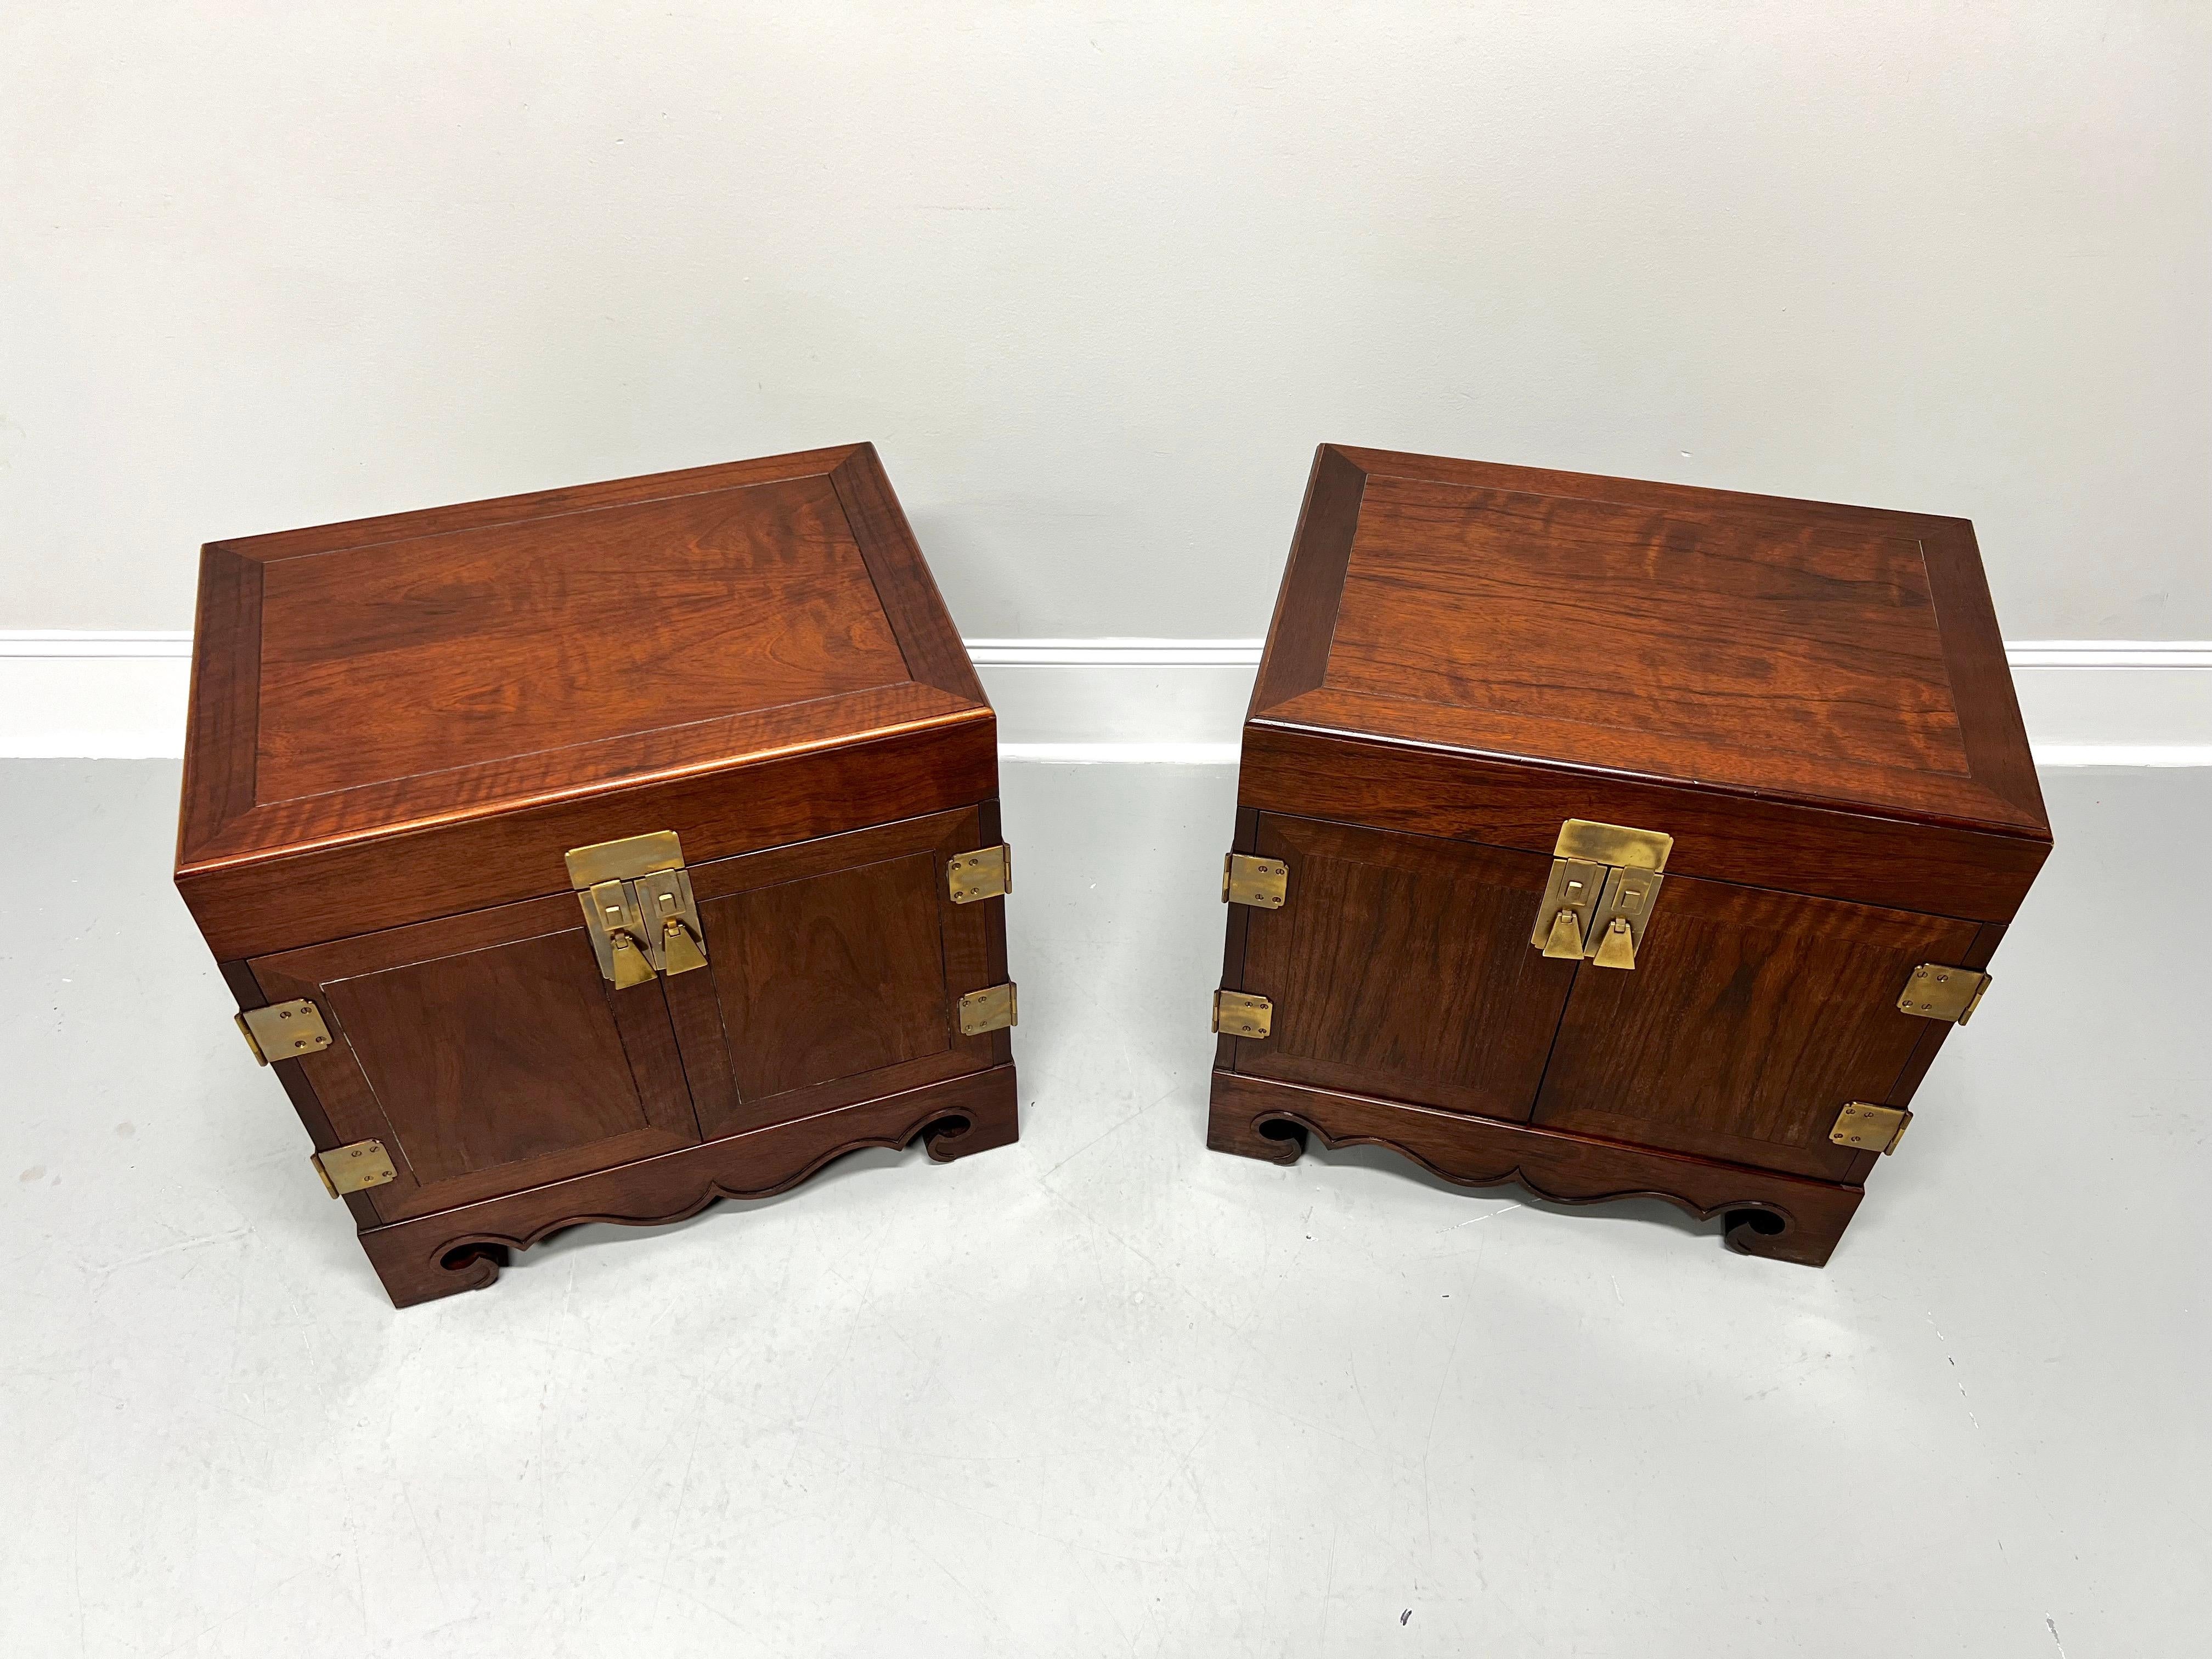 A pair of Asian inspired nightstands designed by Michael Taylor for Baker Furniture. Mahogany with banded bevel edge top, decorative brass hardware, brass side handles, carved apron, and carved bracket feet. Features two solid doors revealing